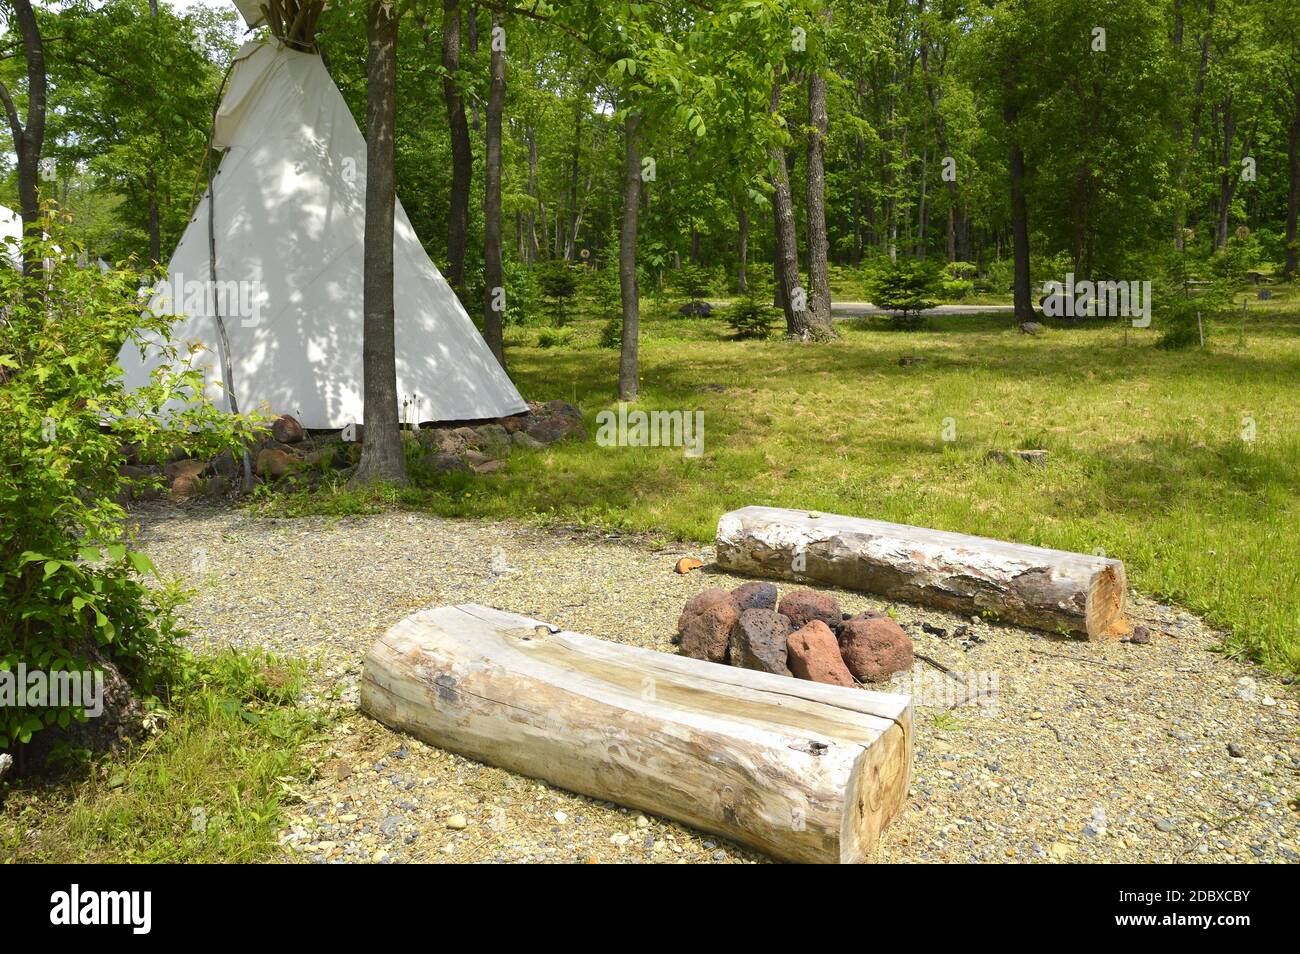 Two wooden seats made of bars next to a bonfire of stones on the background of native American wigwam in forest Stock Photo